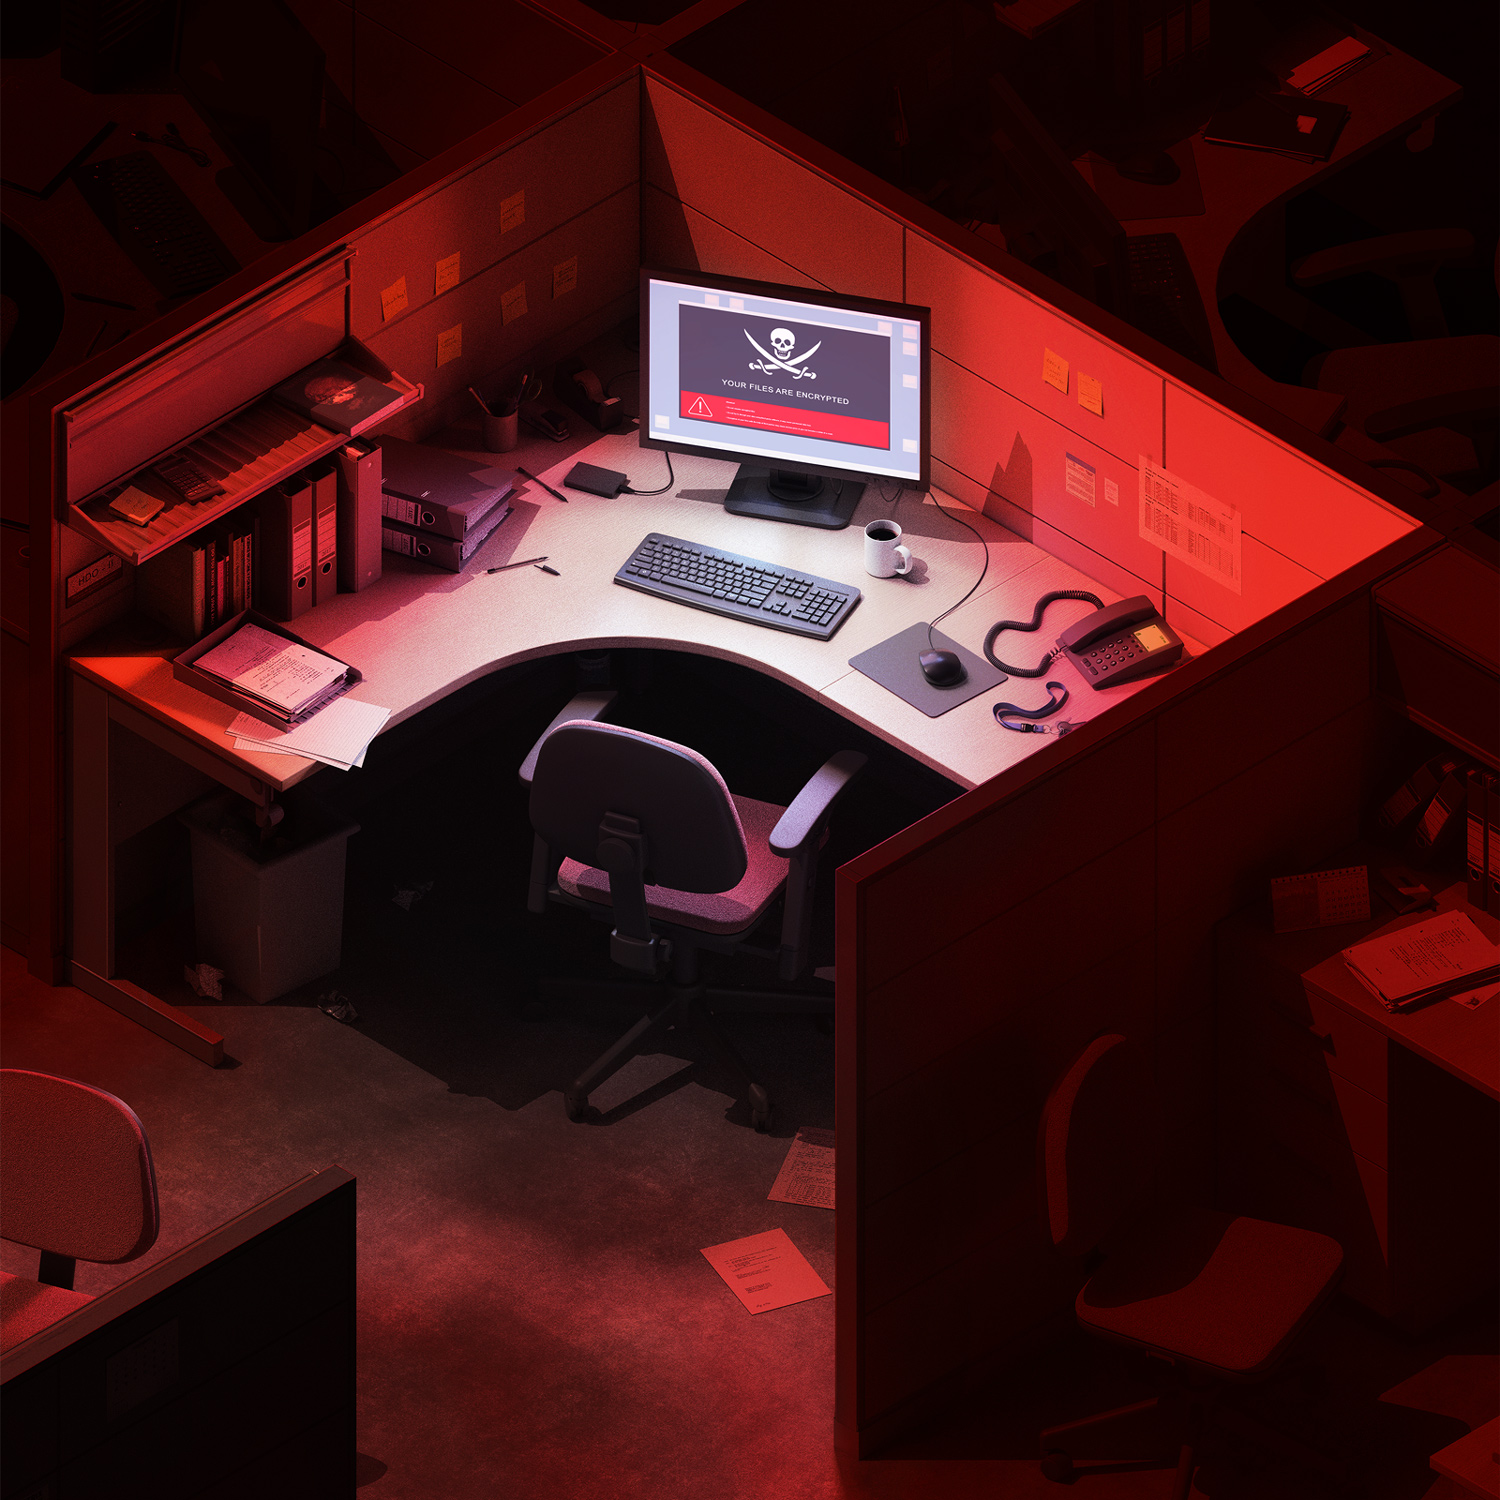 An illustration of a ransomware attack in an office